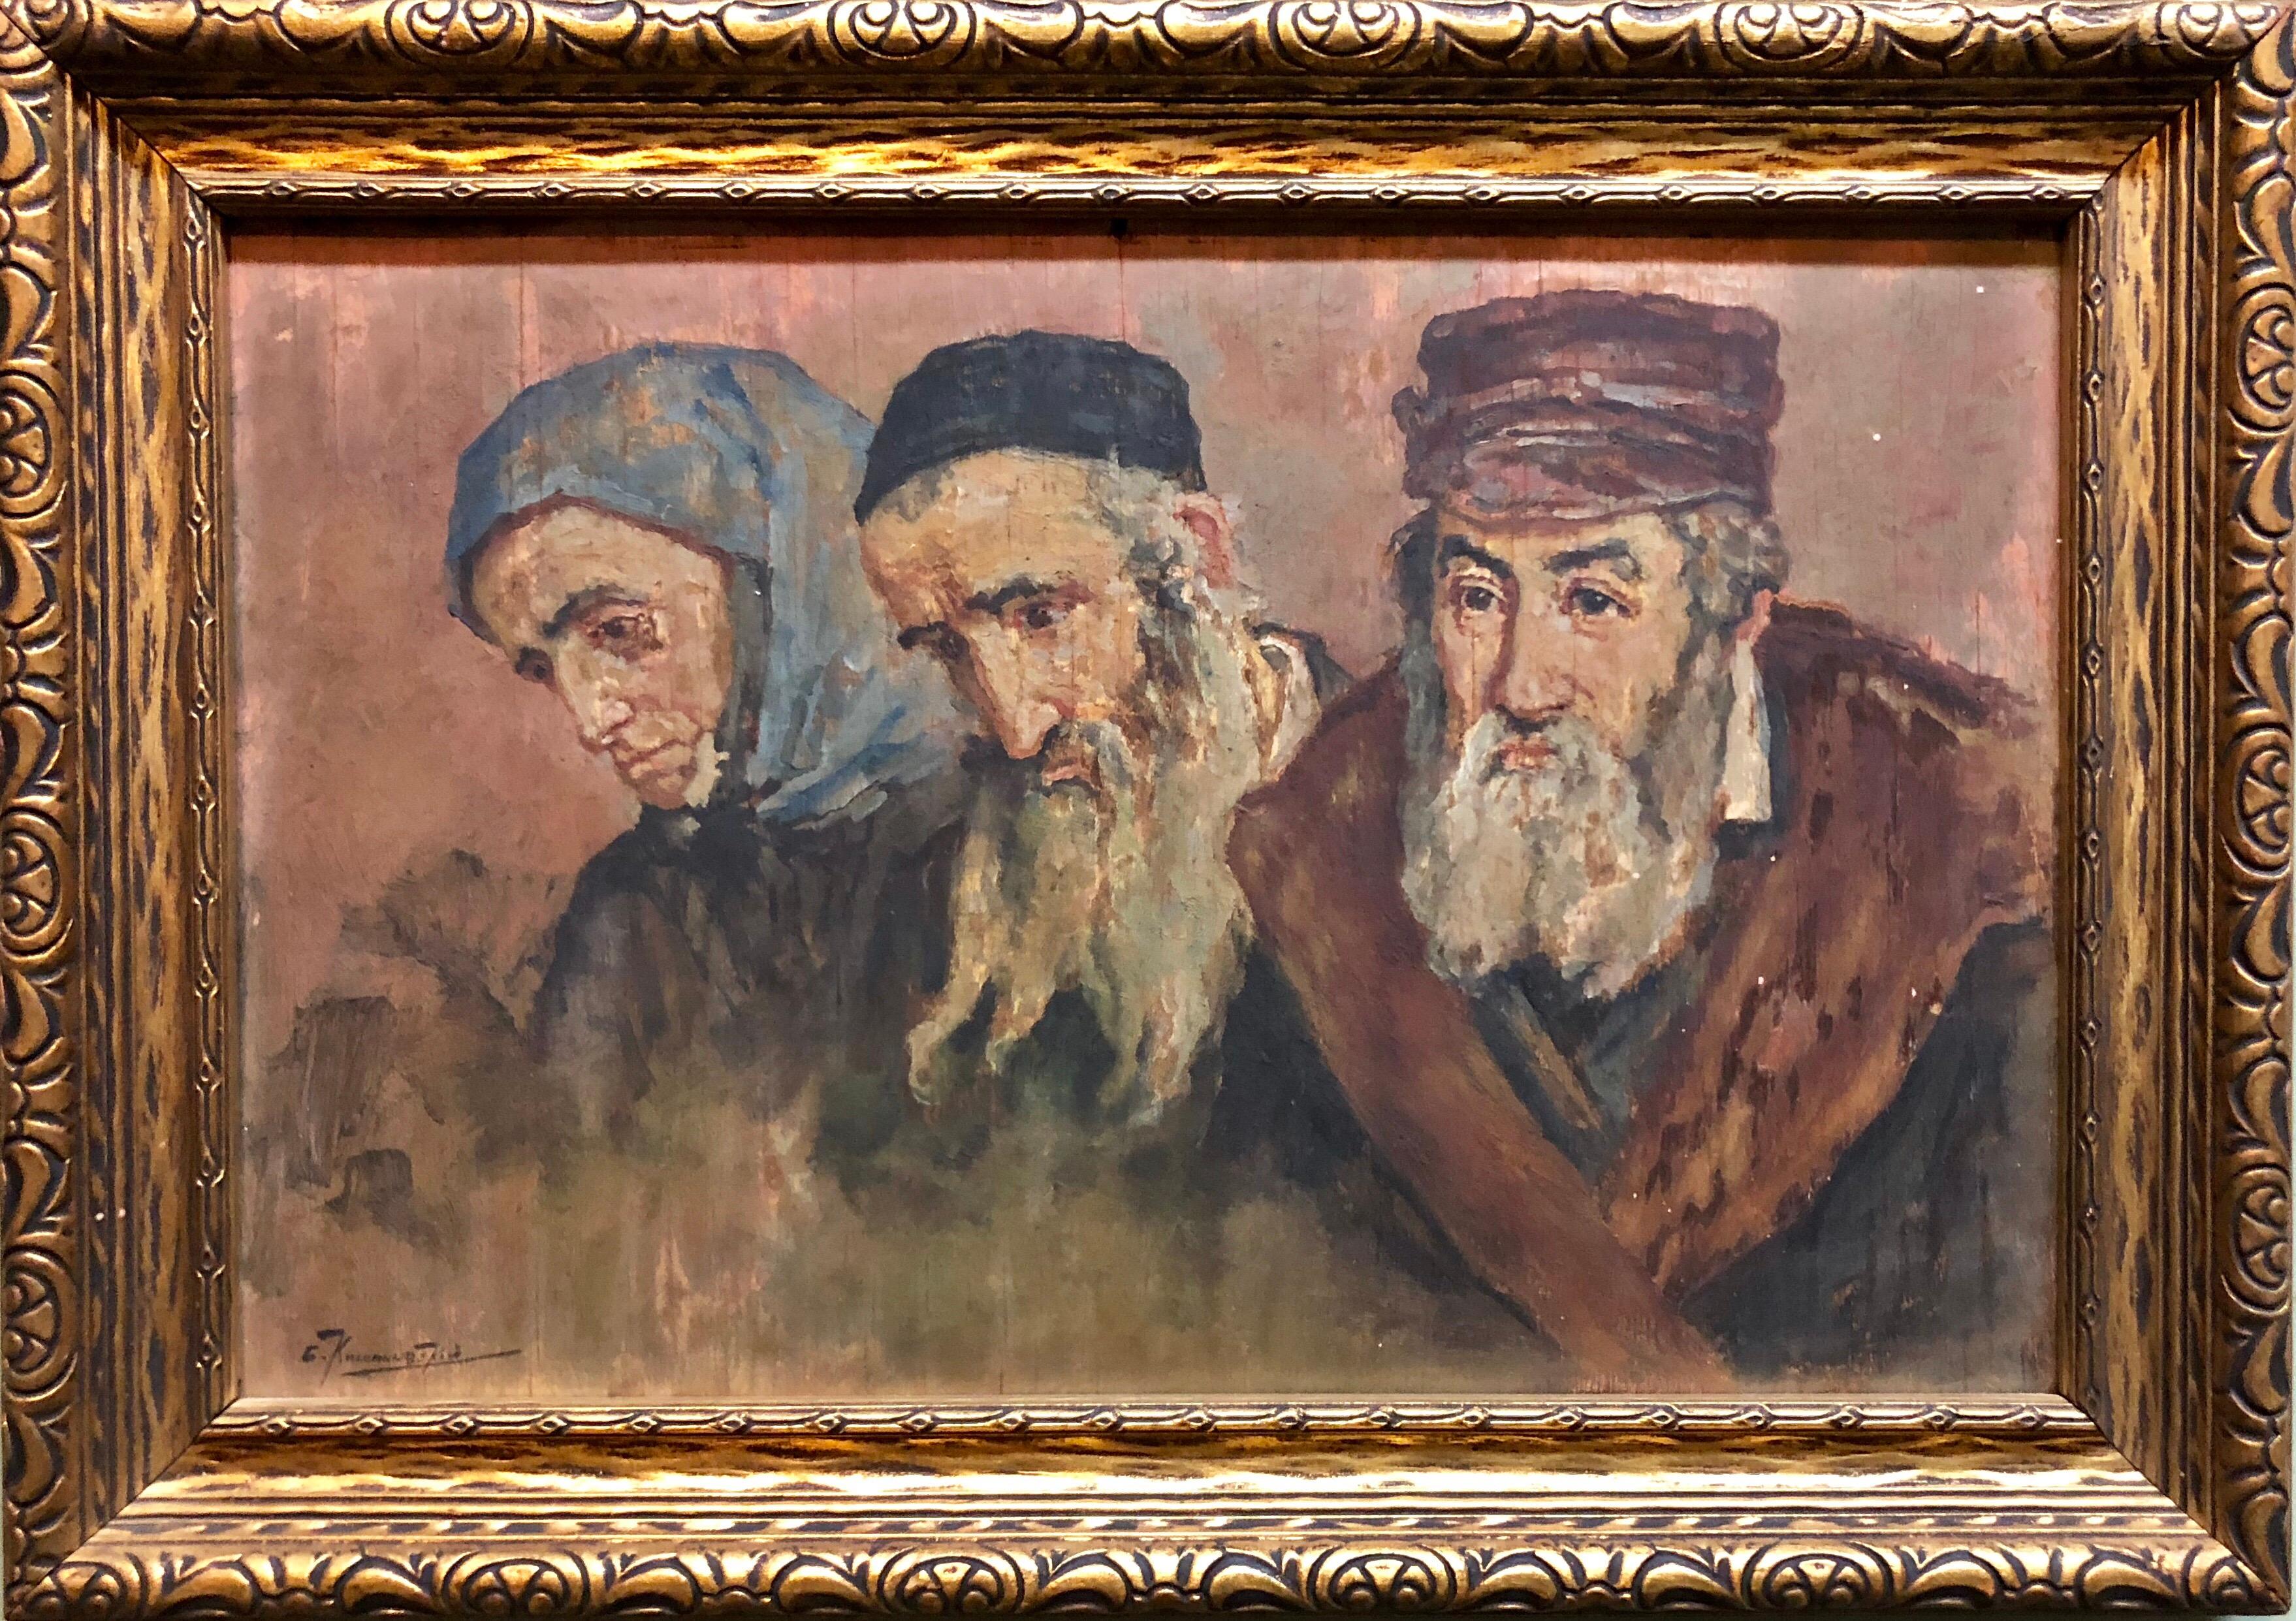 Rare Russian Judaica Oil Painting Jewish Pogrom Refugees Signed in Cyrillic